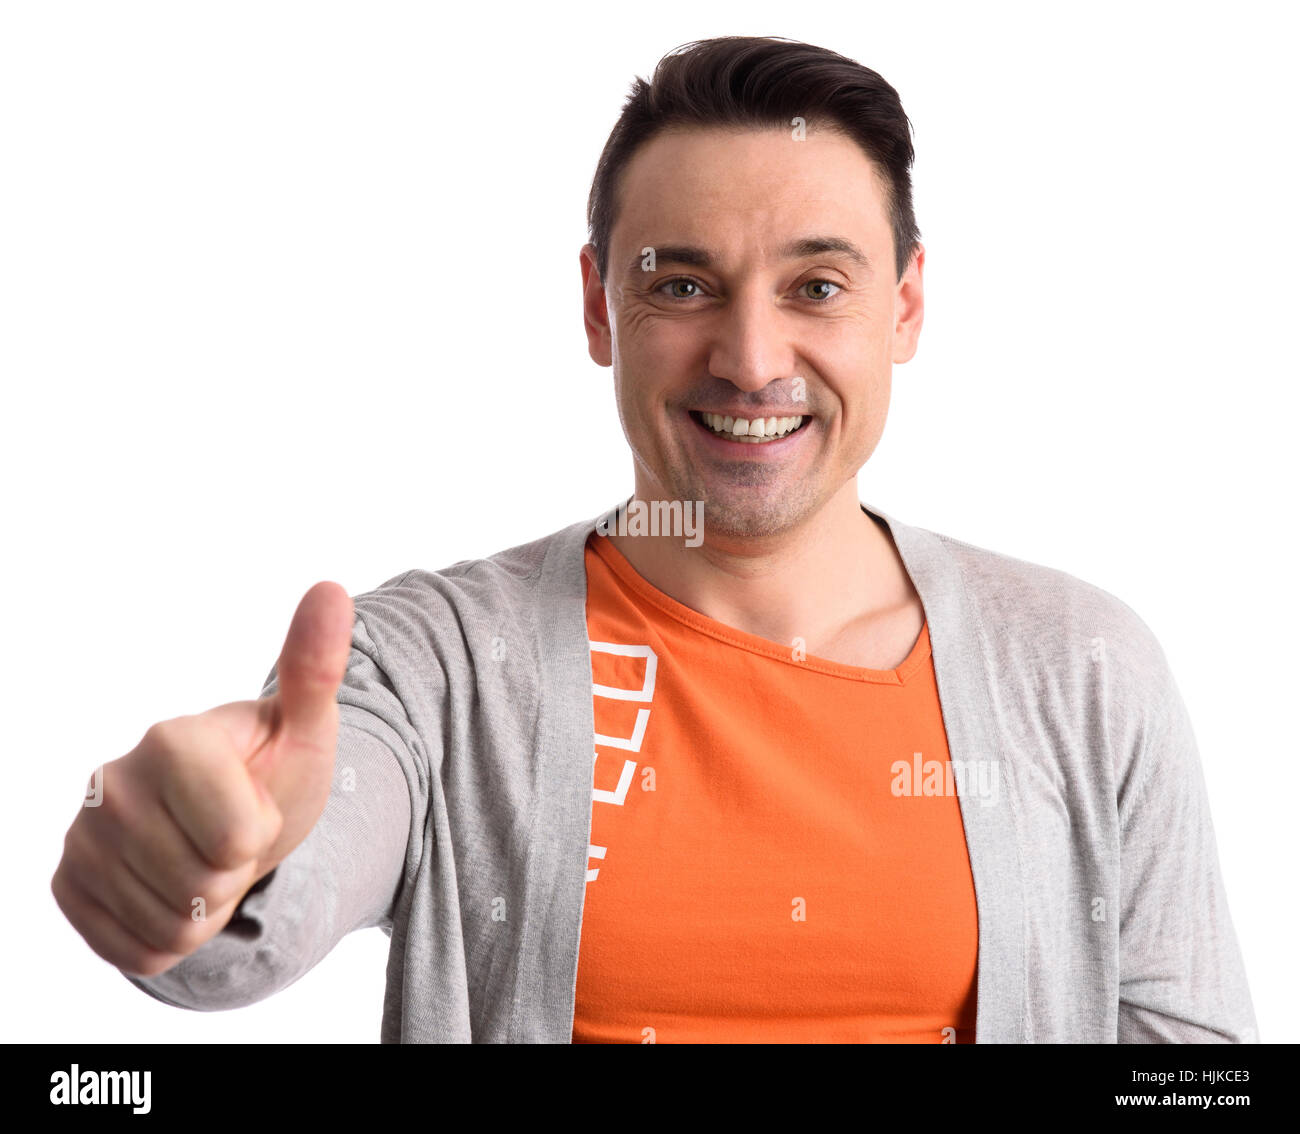 Man with thumbs up isolated on white background Stock Photo